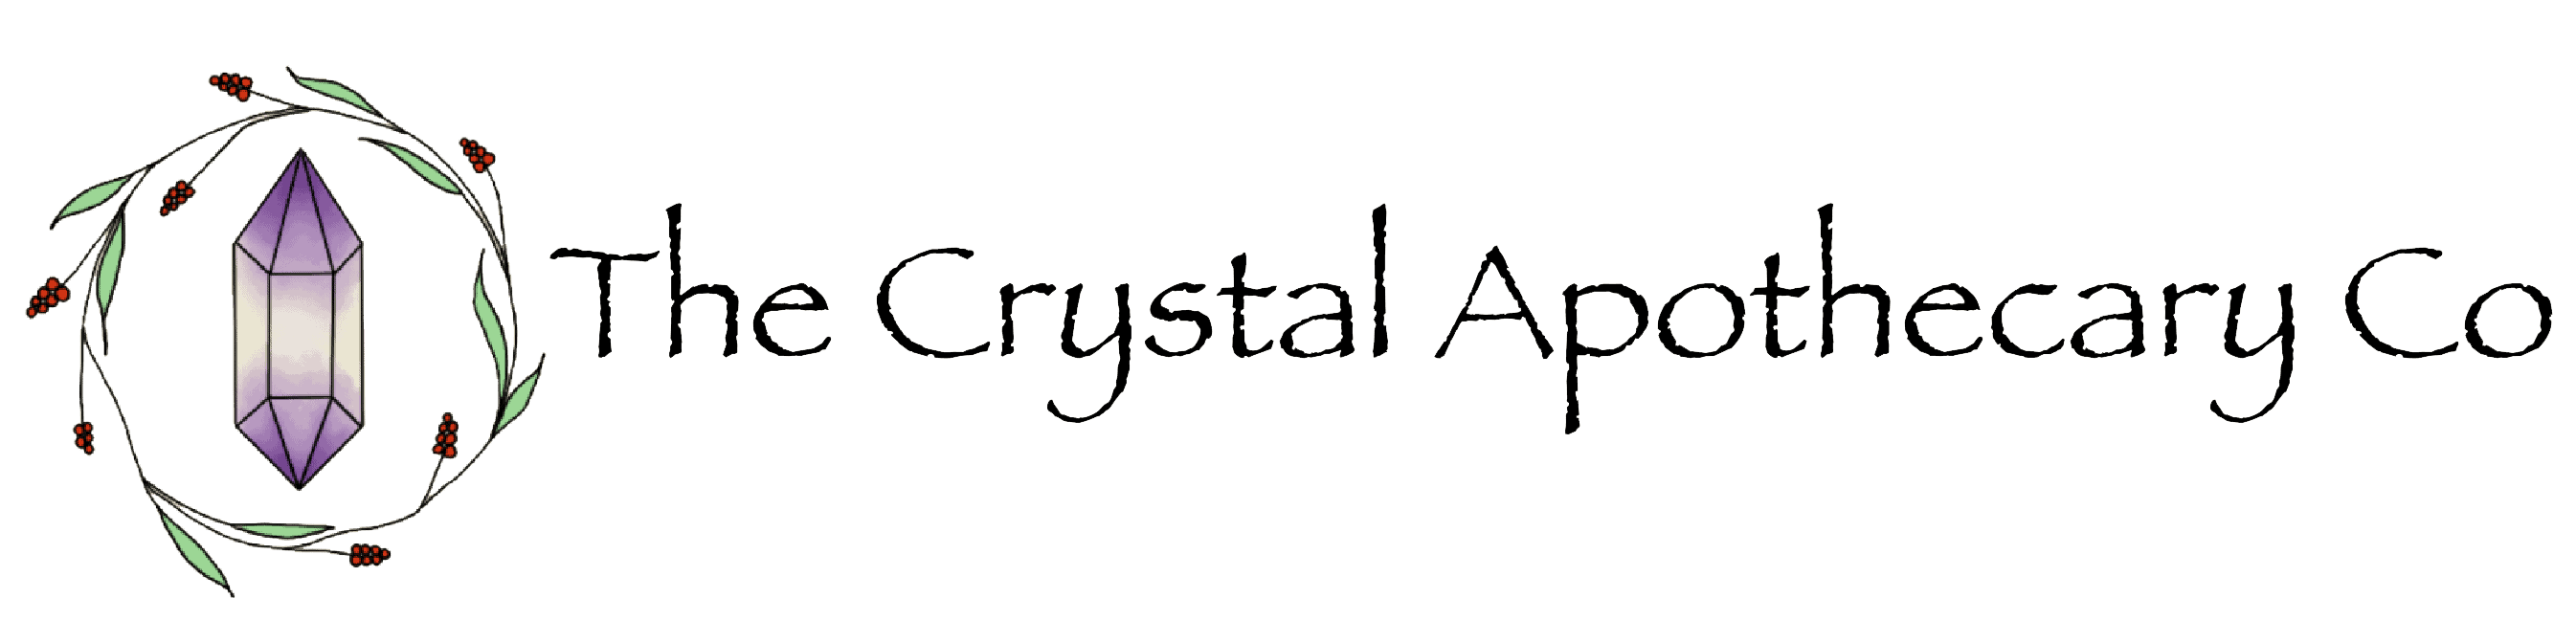 The Crystal Apothecary Co